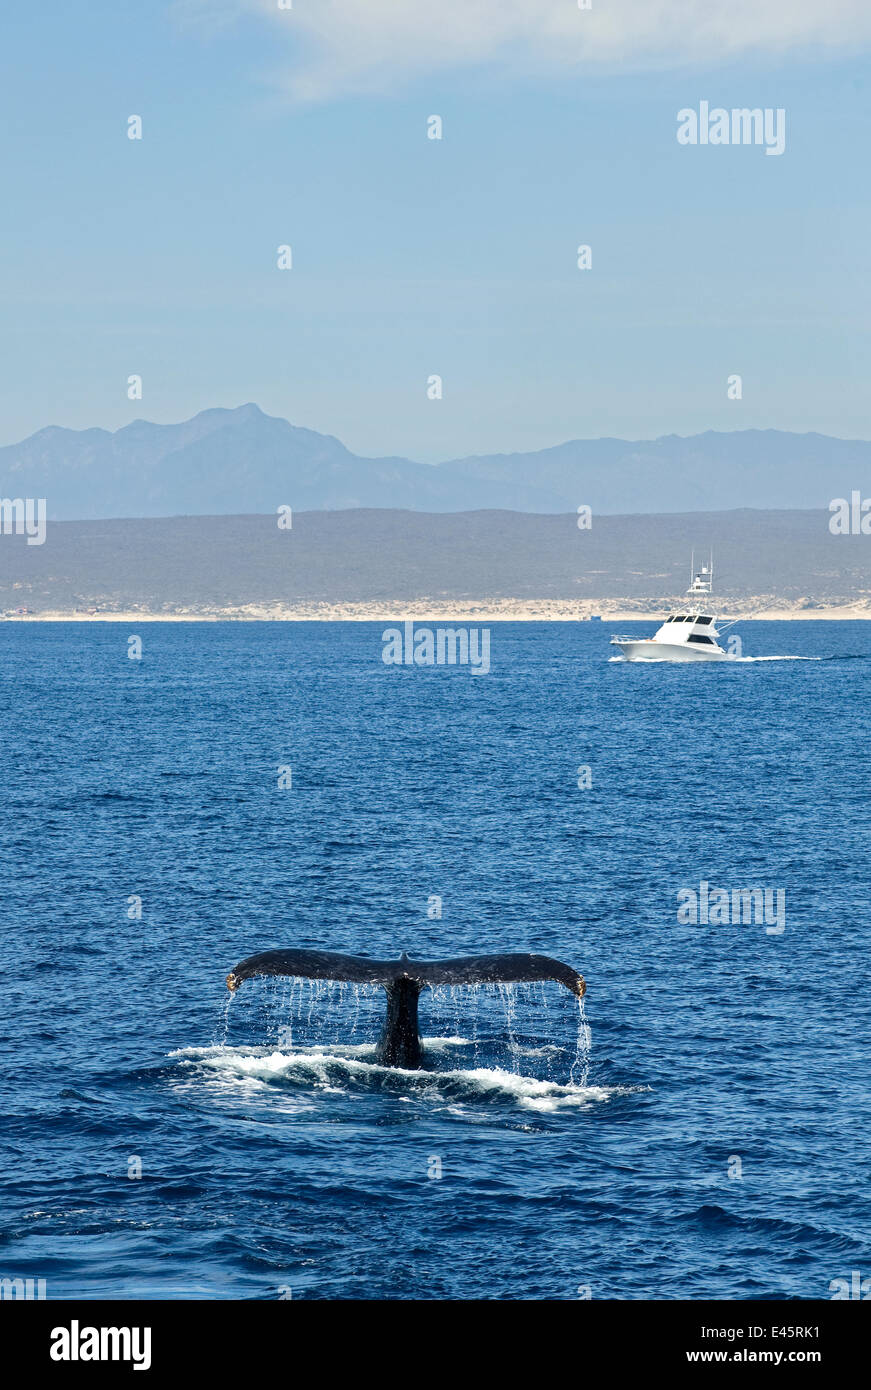 Humpback whale (Megaptera novaeangliae) fluking - lifting the tail in the air before a dive, boat and coast in background, Sea of Cortez, Baja California, Mexico Stock Photo